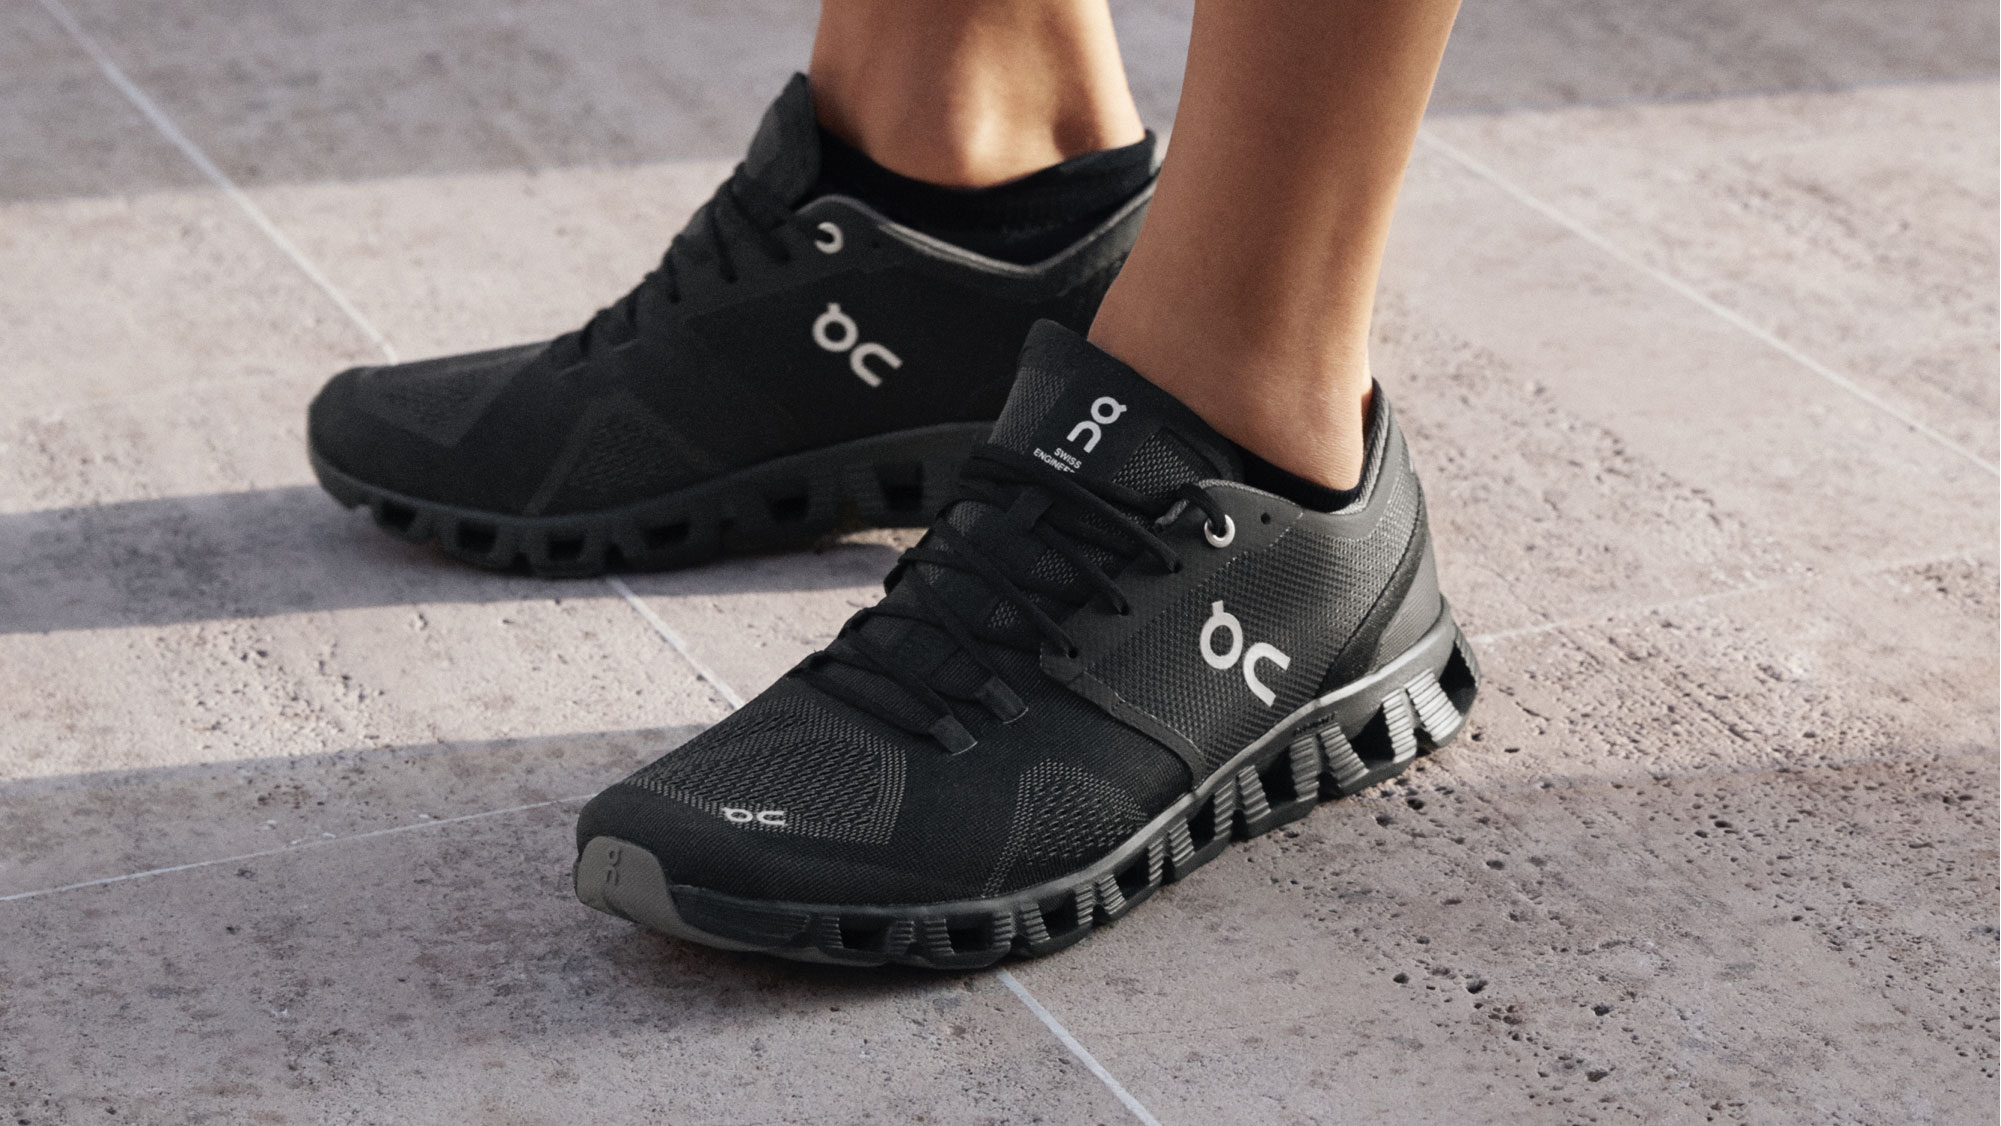 On Cloud X review: super-light and comfy workout shoes